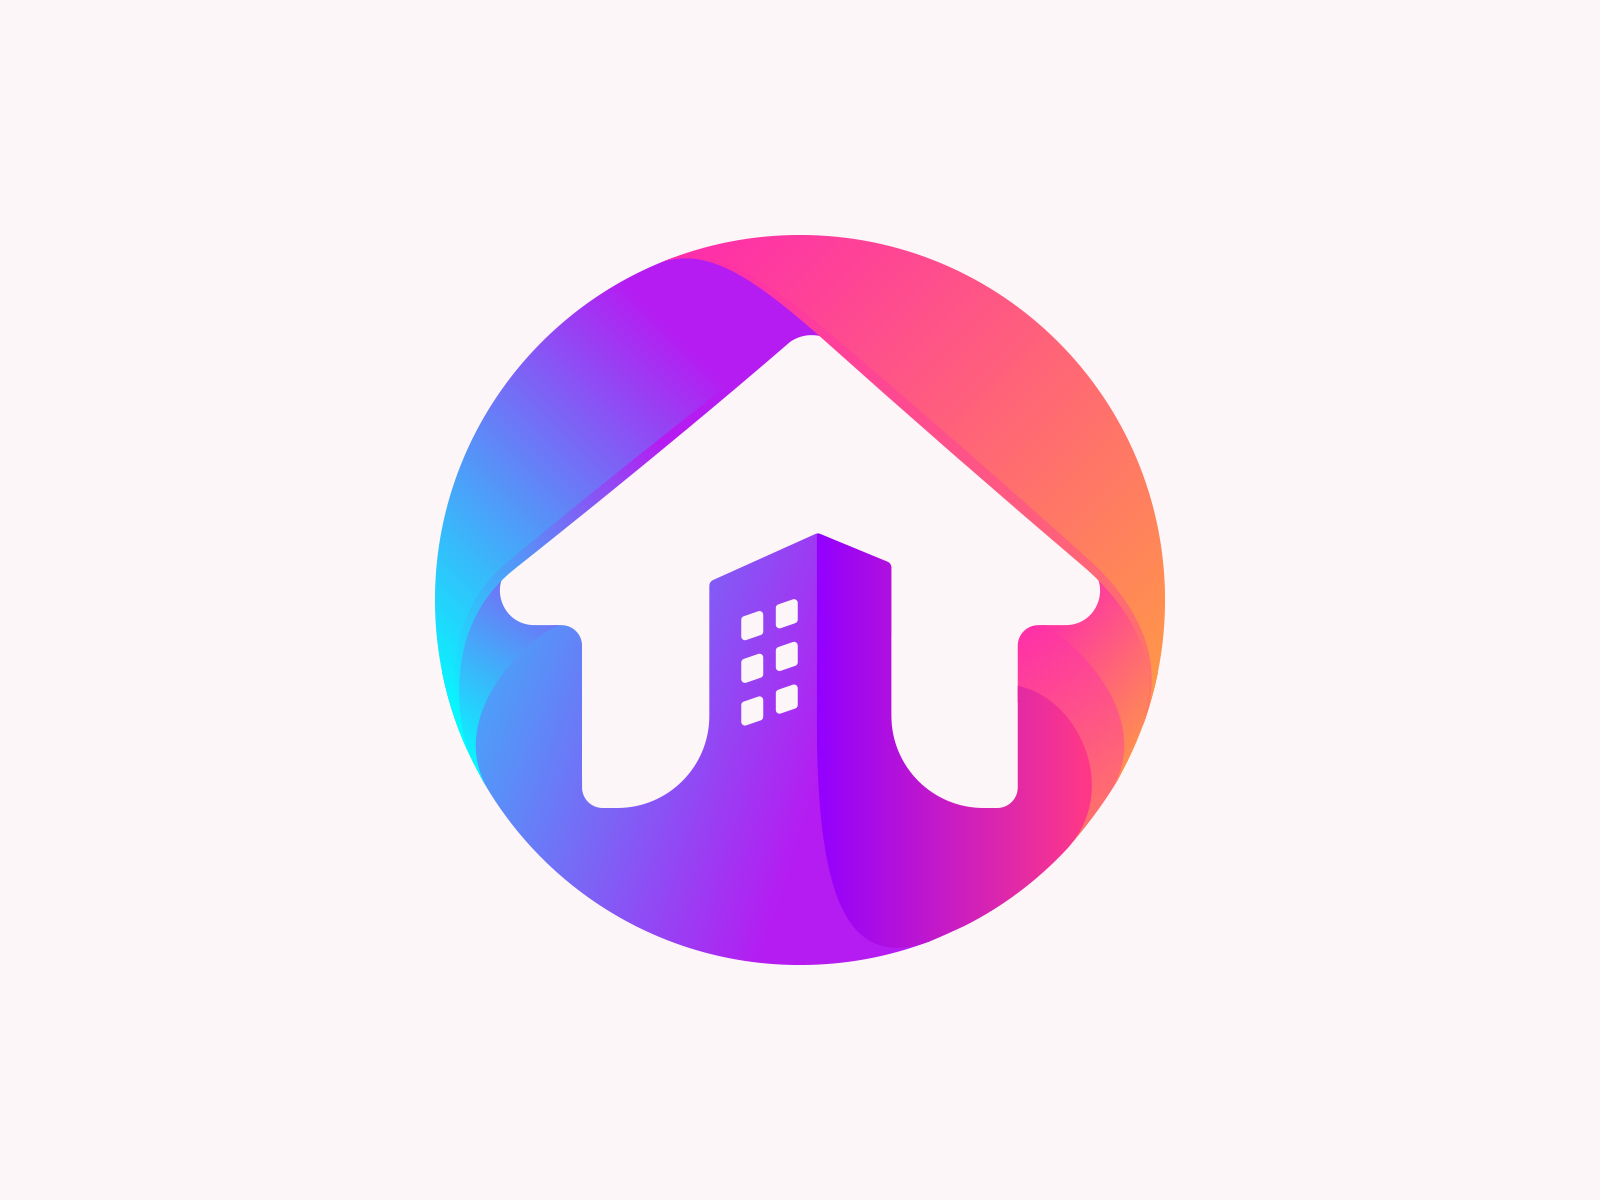 HomeApp Logo logo design by logo designer Nazztudio for your inspiration and for the worlds largest logo competition